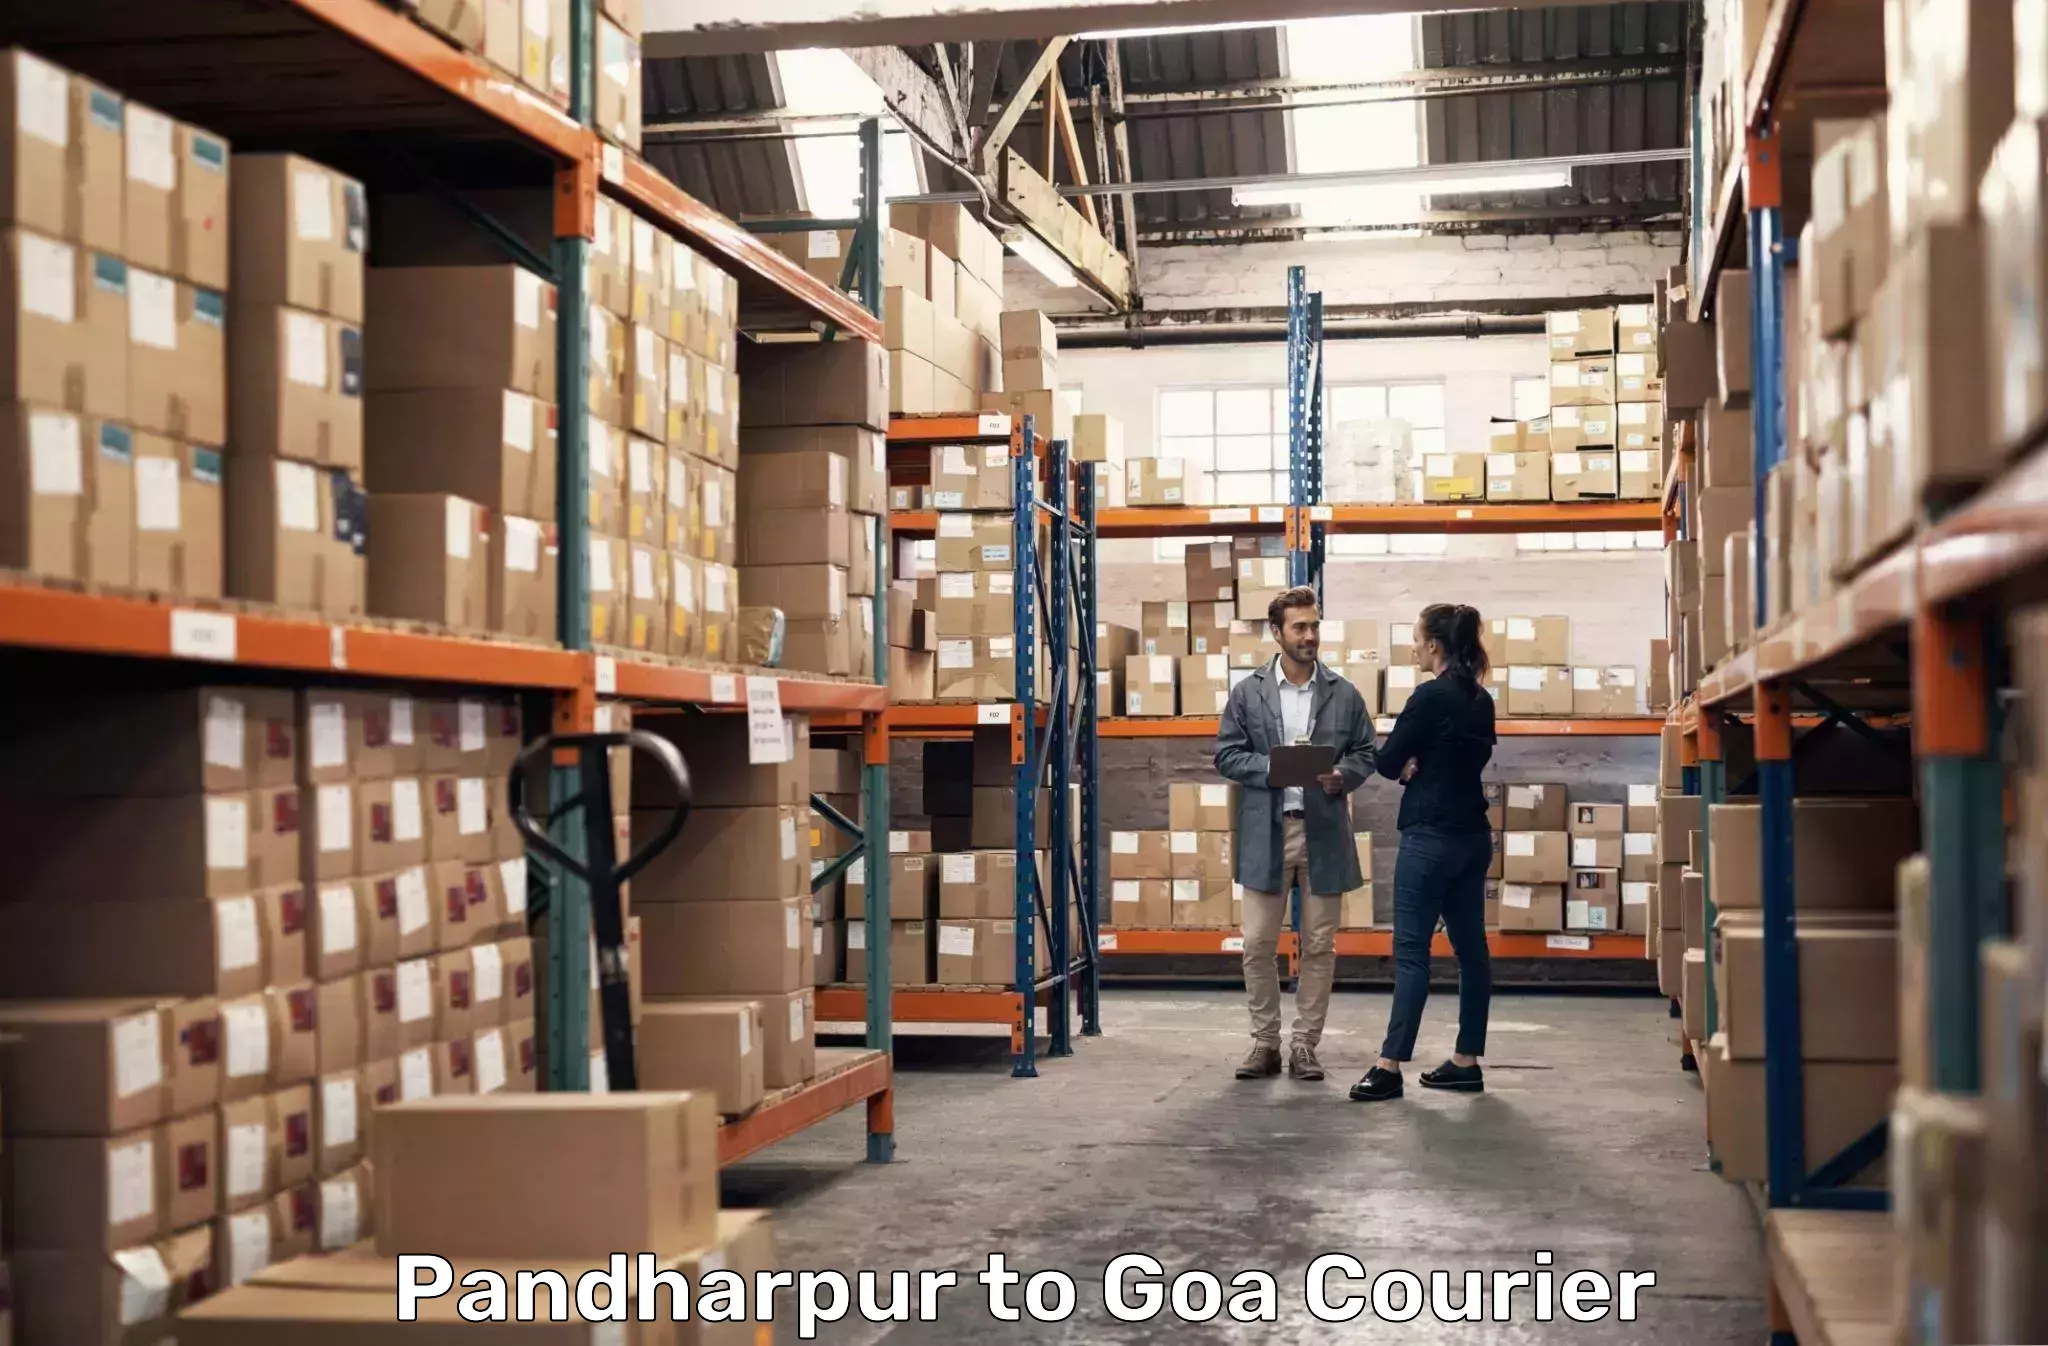 Global courier networks Pandharpur to Margao